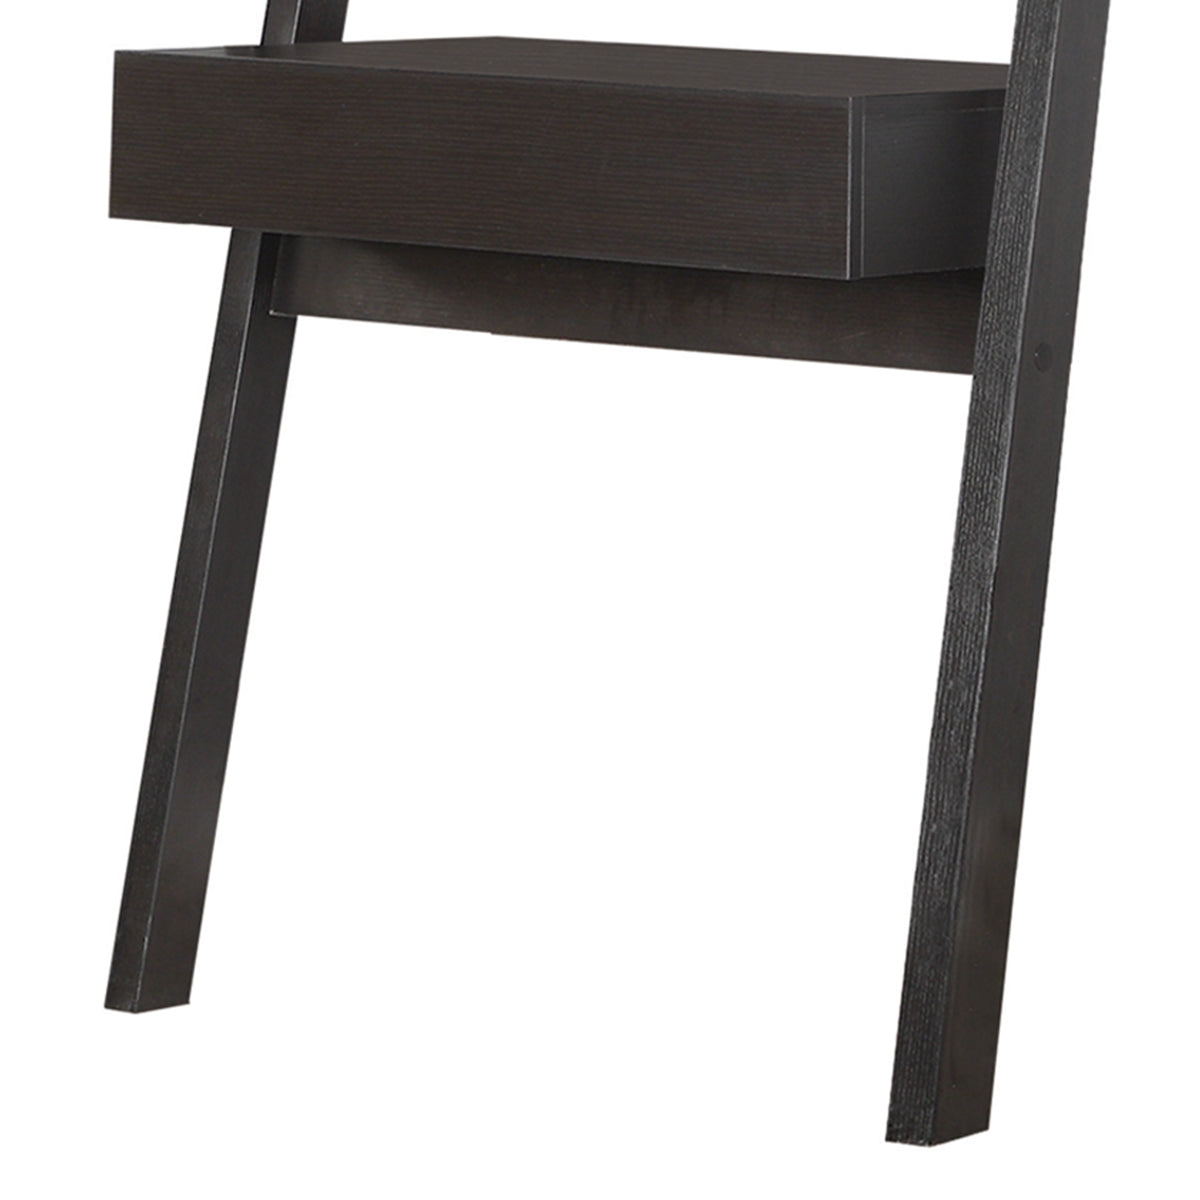 BM172239 Ladder Desk With One Drawer, Cappuccino